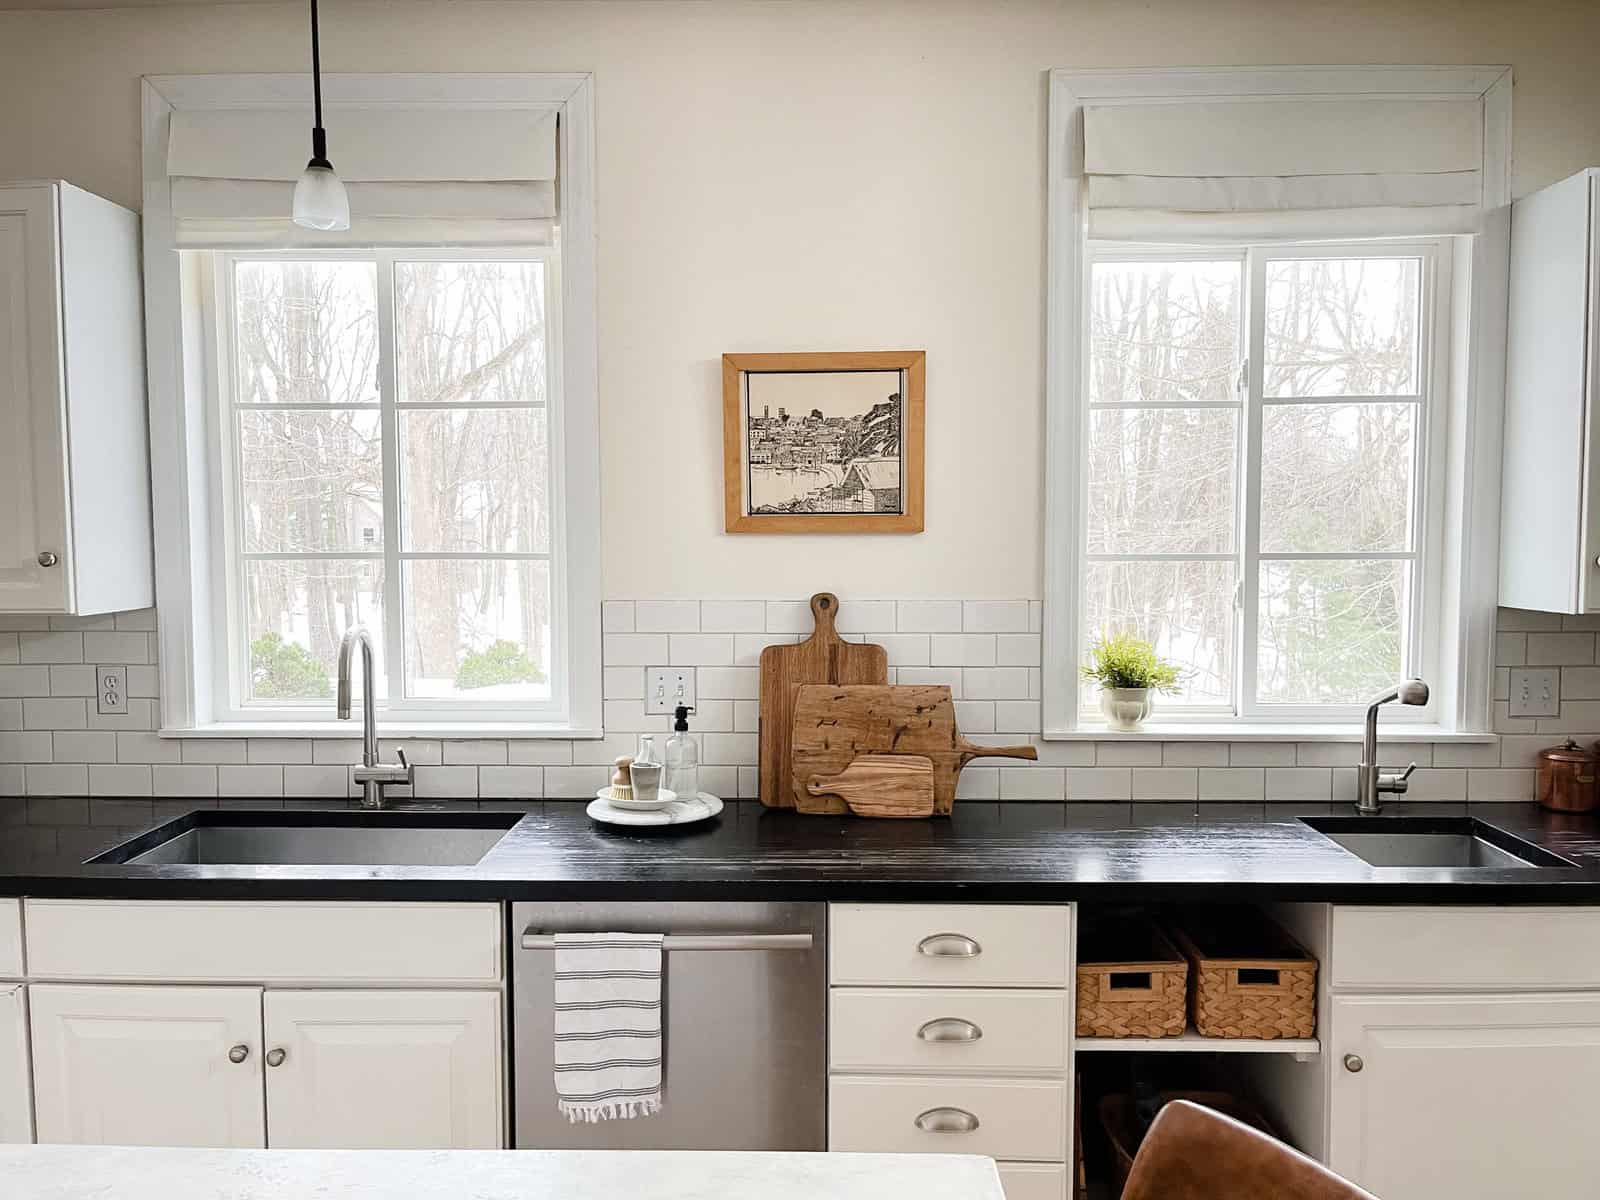 A classic white kitchen with black counters